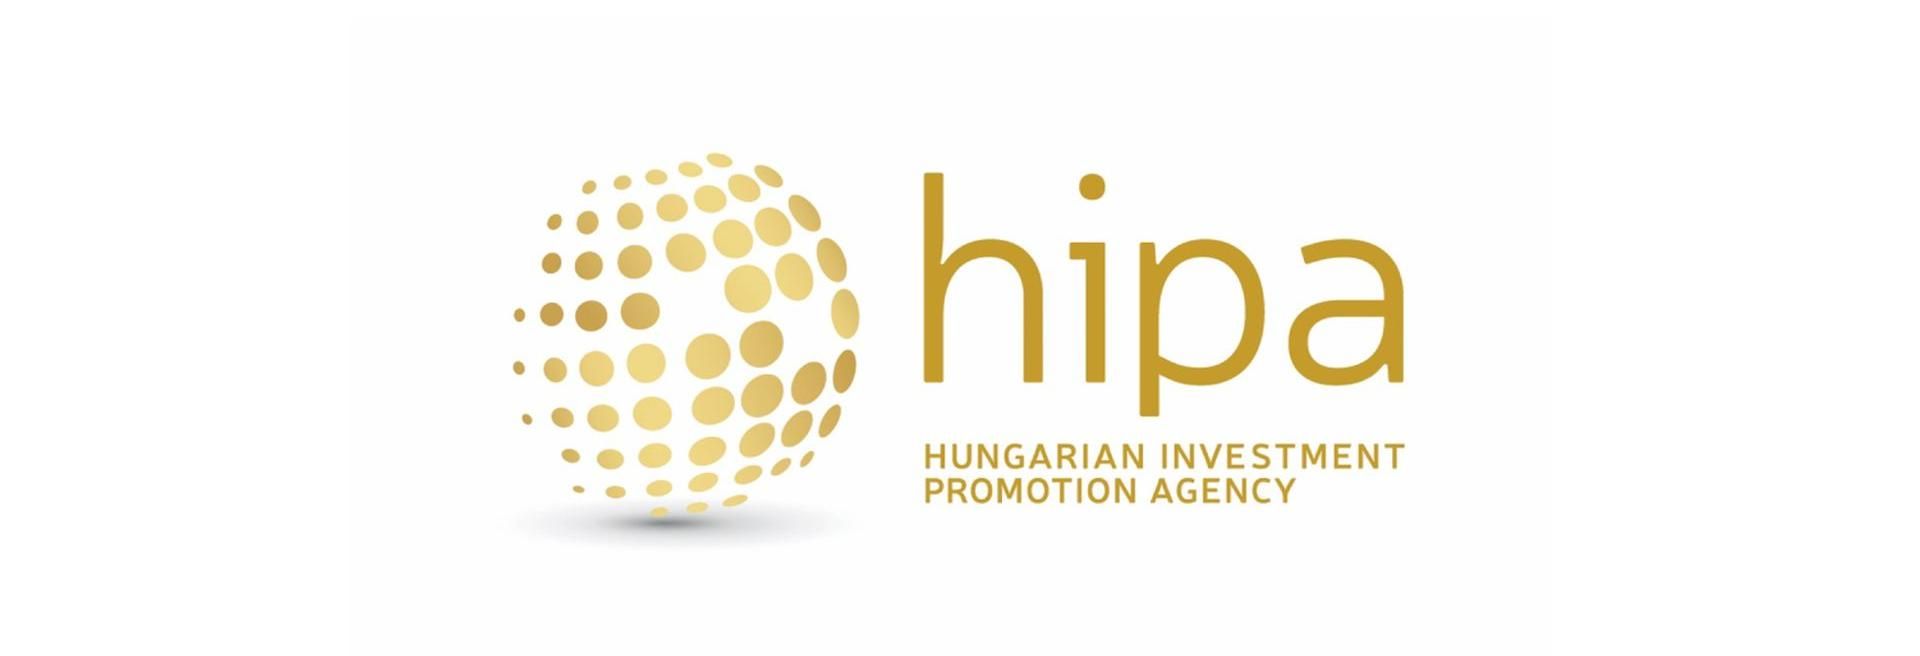 HIPA Committed To Keep Hungary On Growth Track – CEO Radio Interview